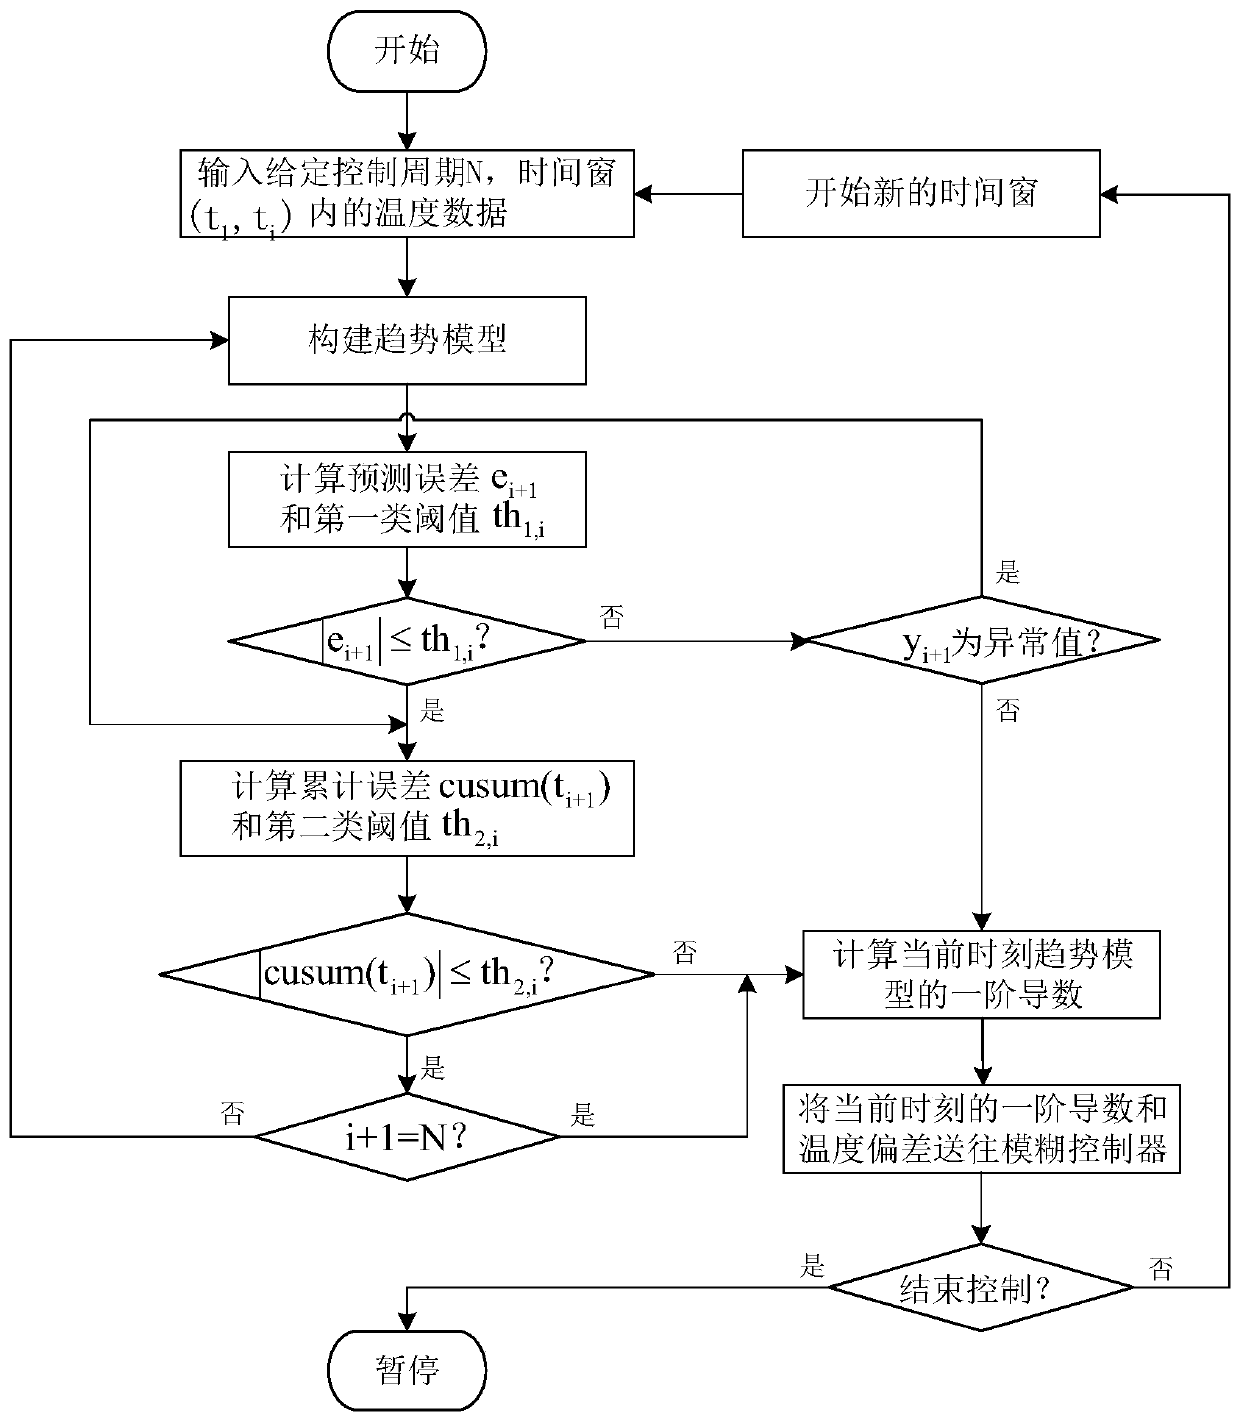 Fuzzy control method for zinc smelting and roasting process based on trend event driving